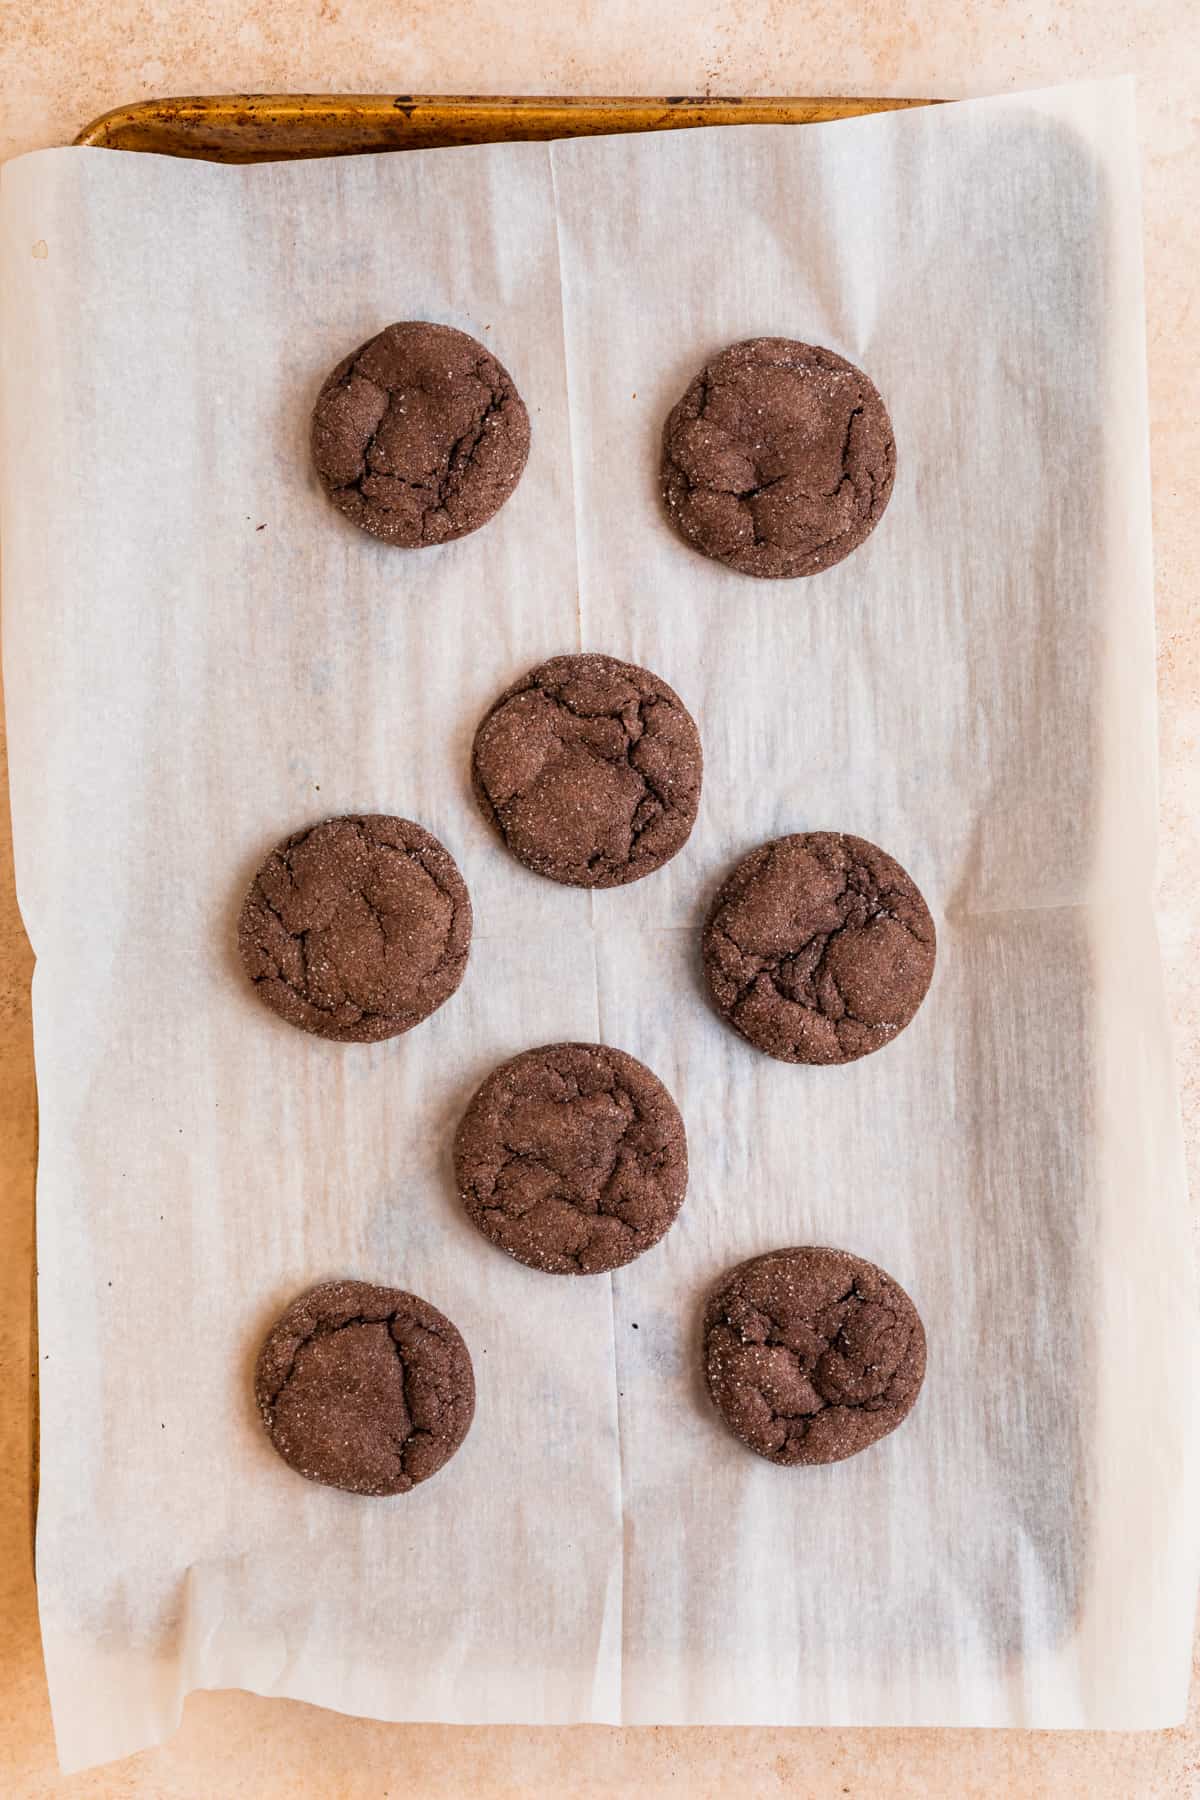 Baked chocolate cake mix cookies on parchment lined cookie sheet.